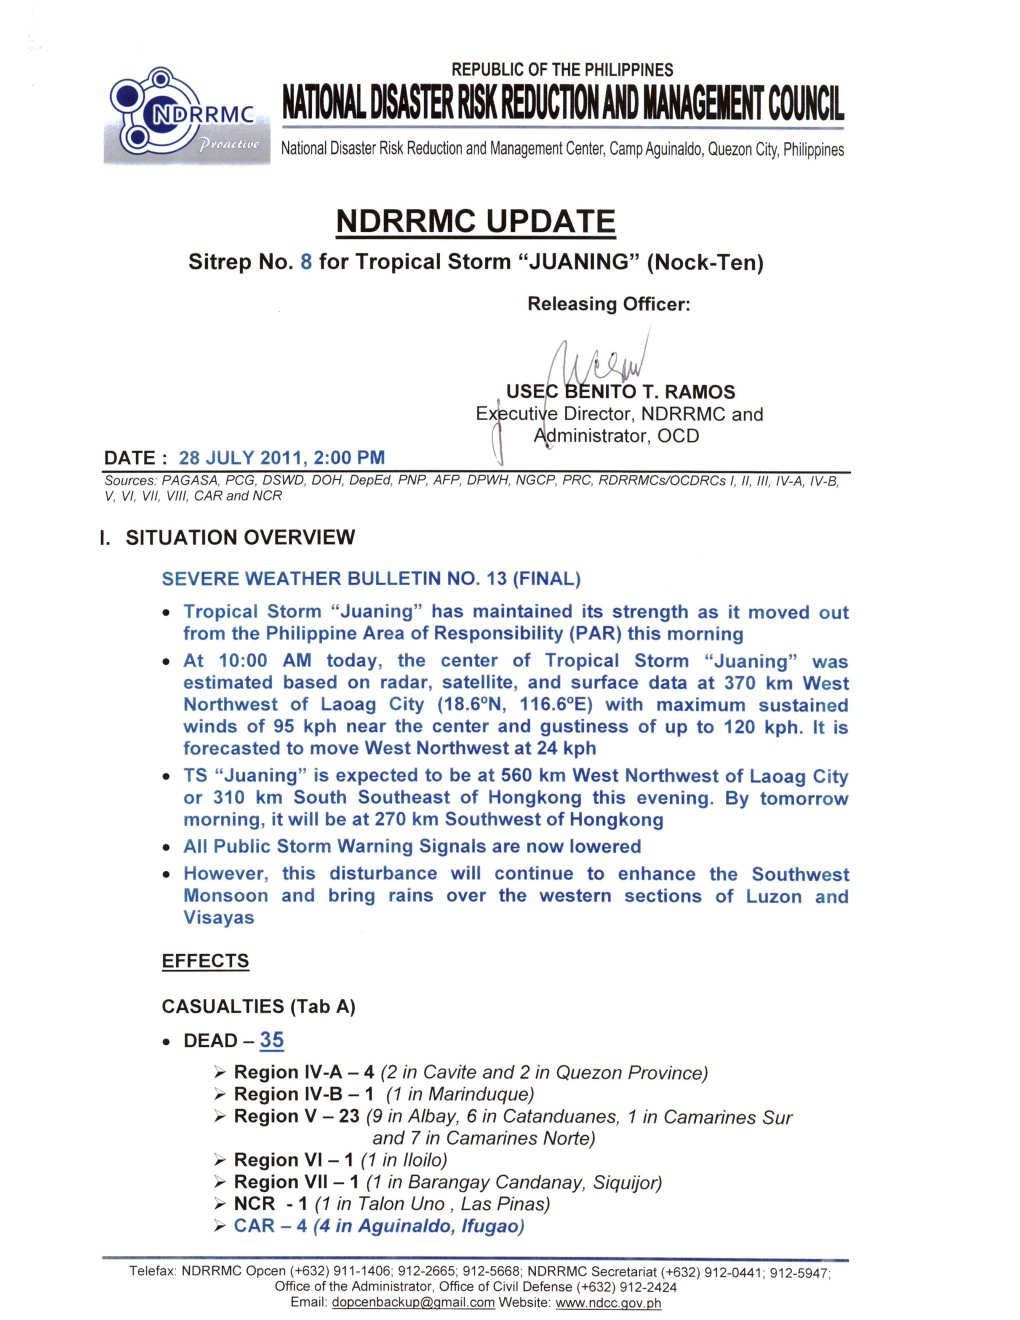 NDRRMC Update Sitrep No. 8 for Tropical Storm JUANING